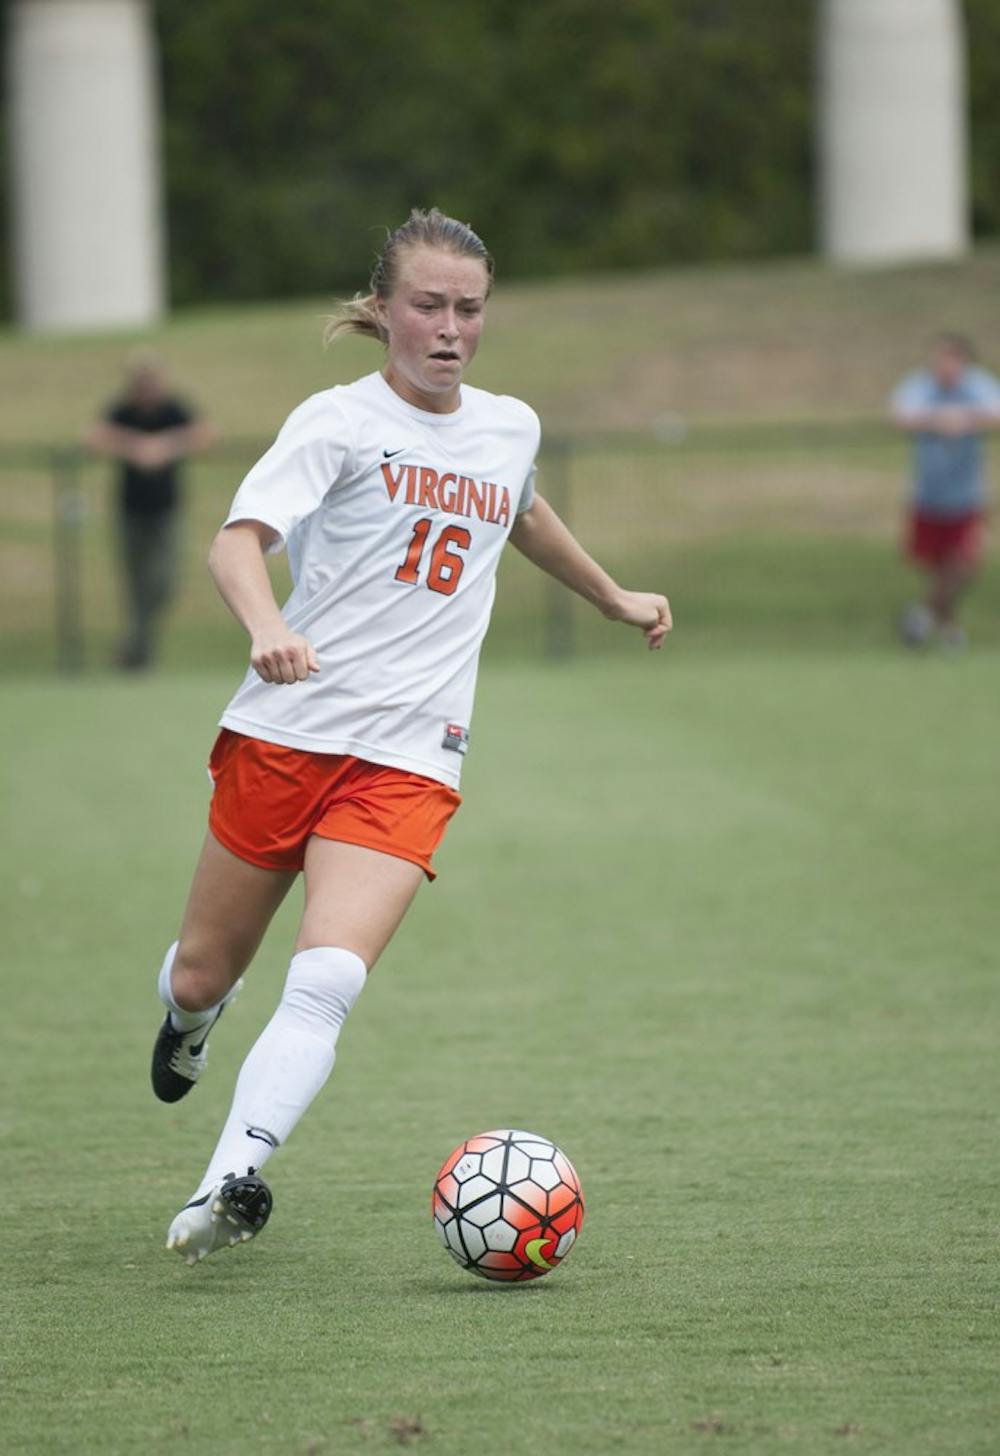 <p>Senior defender and captain Emily Sonnett has provided constant leadership for the Cavaliers, according to junior goalkeeper Morgan Stearns. "Emily is always leading, always discussing," Stearns said. </p>